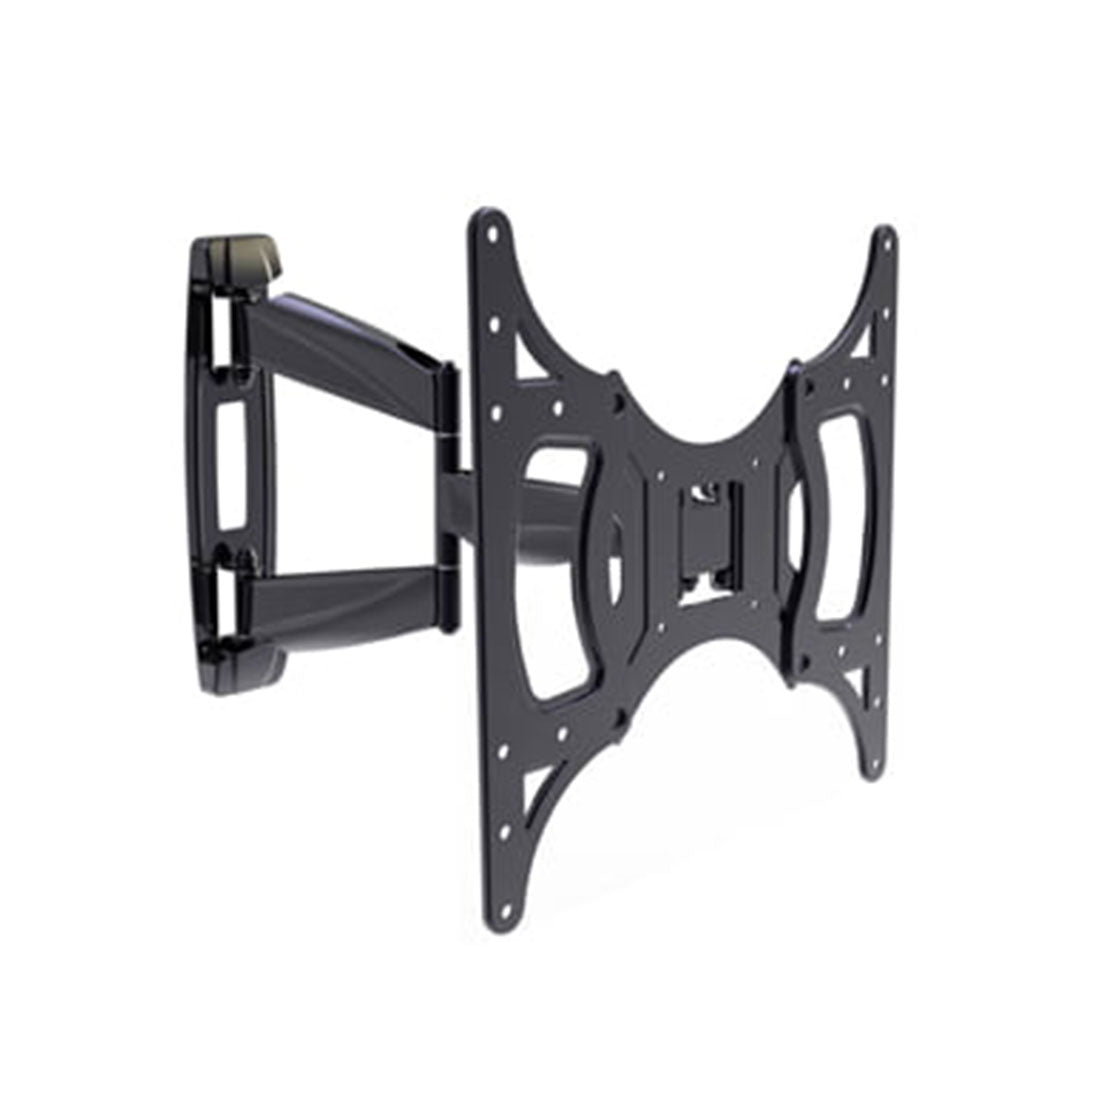 IQ IQMS2650 Full Motion Articulating TV Wall Mount for 26" to 50" Flat panel TVs